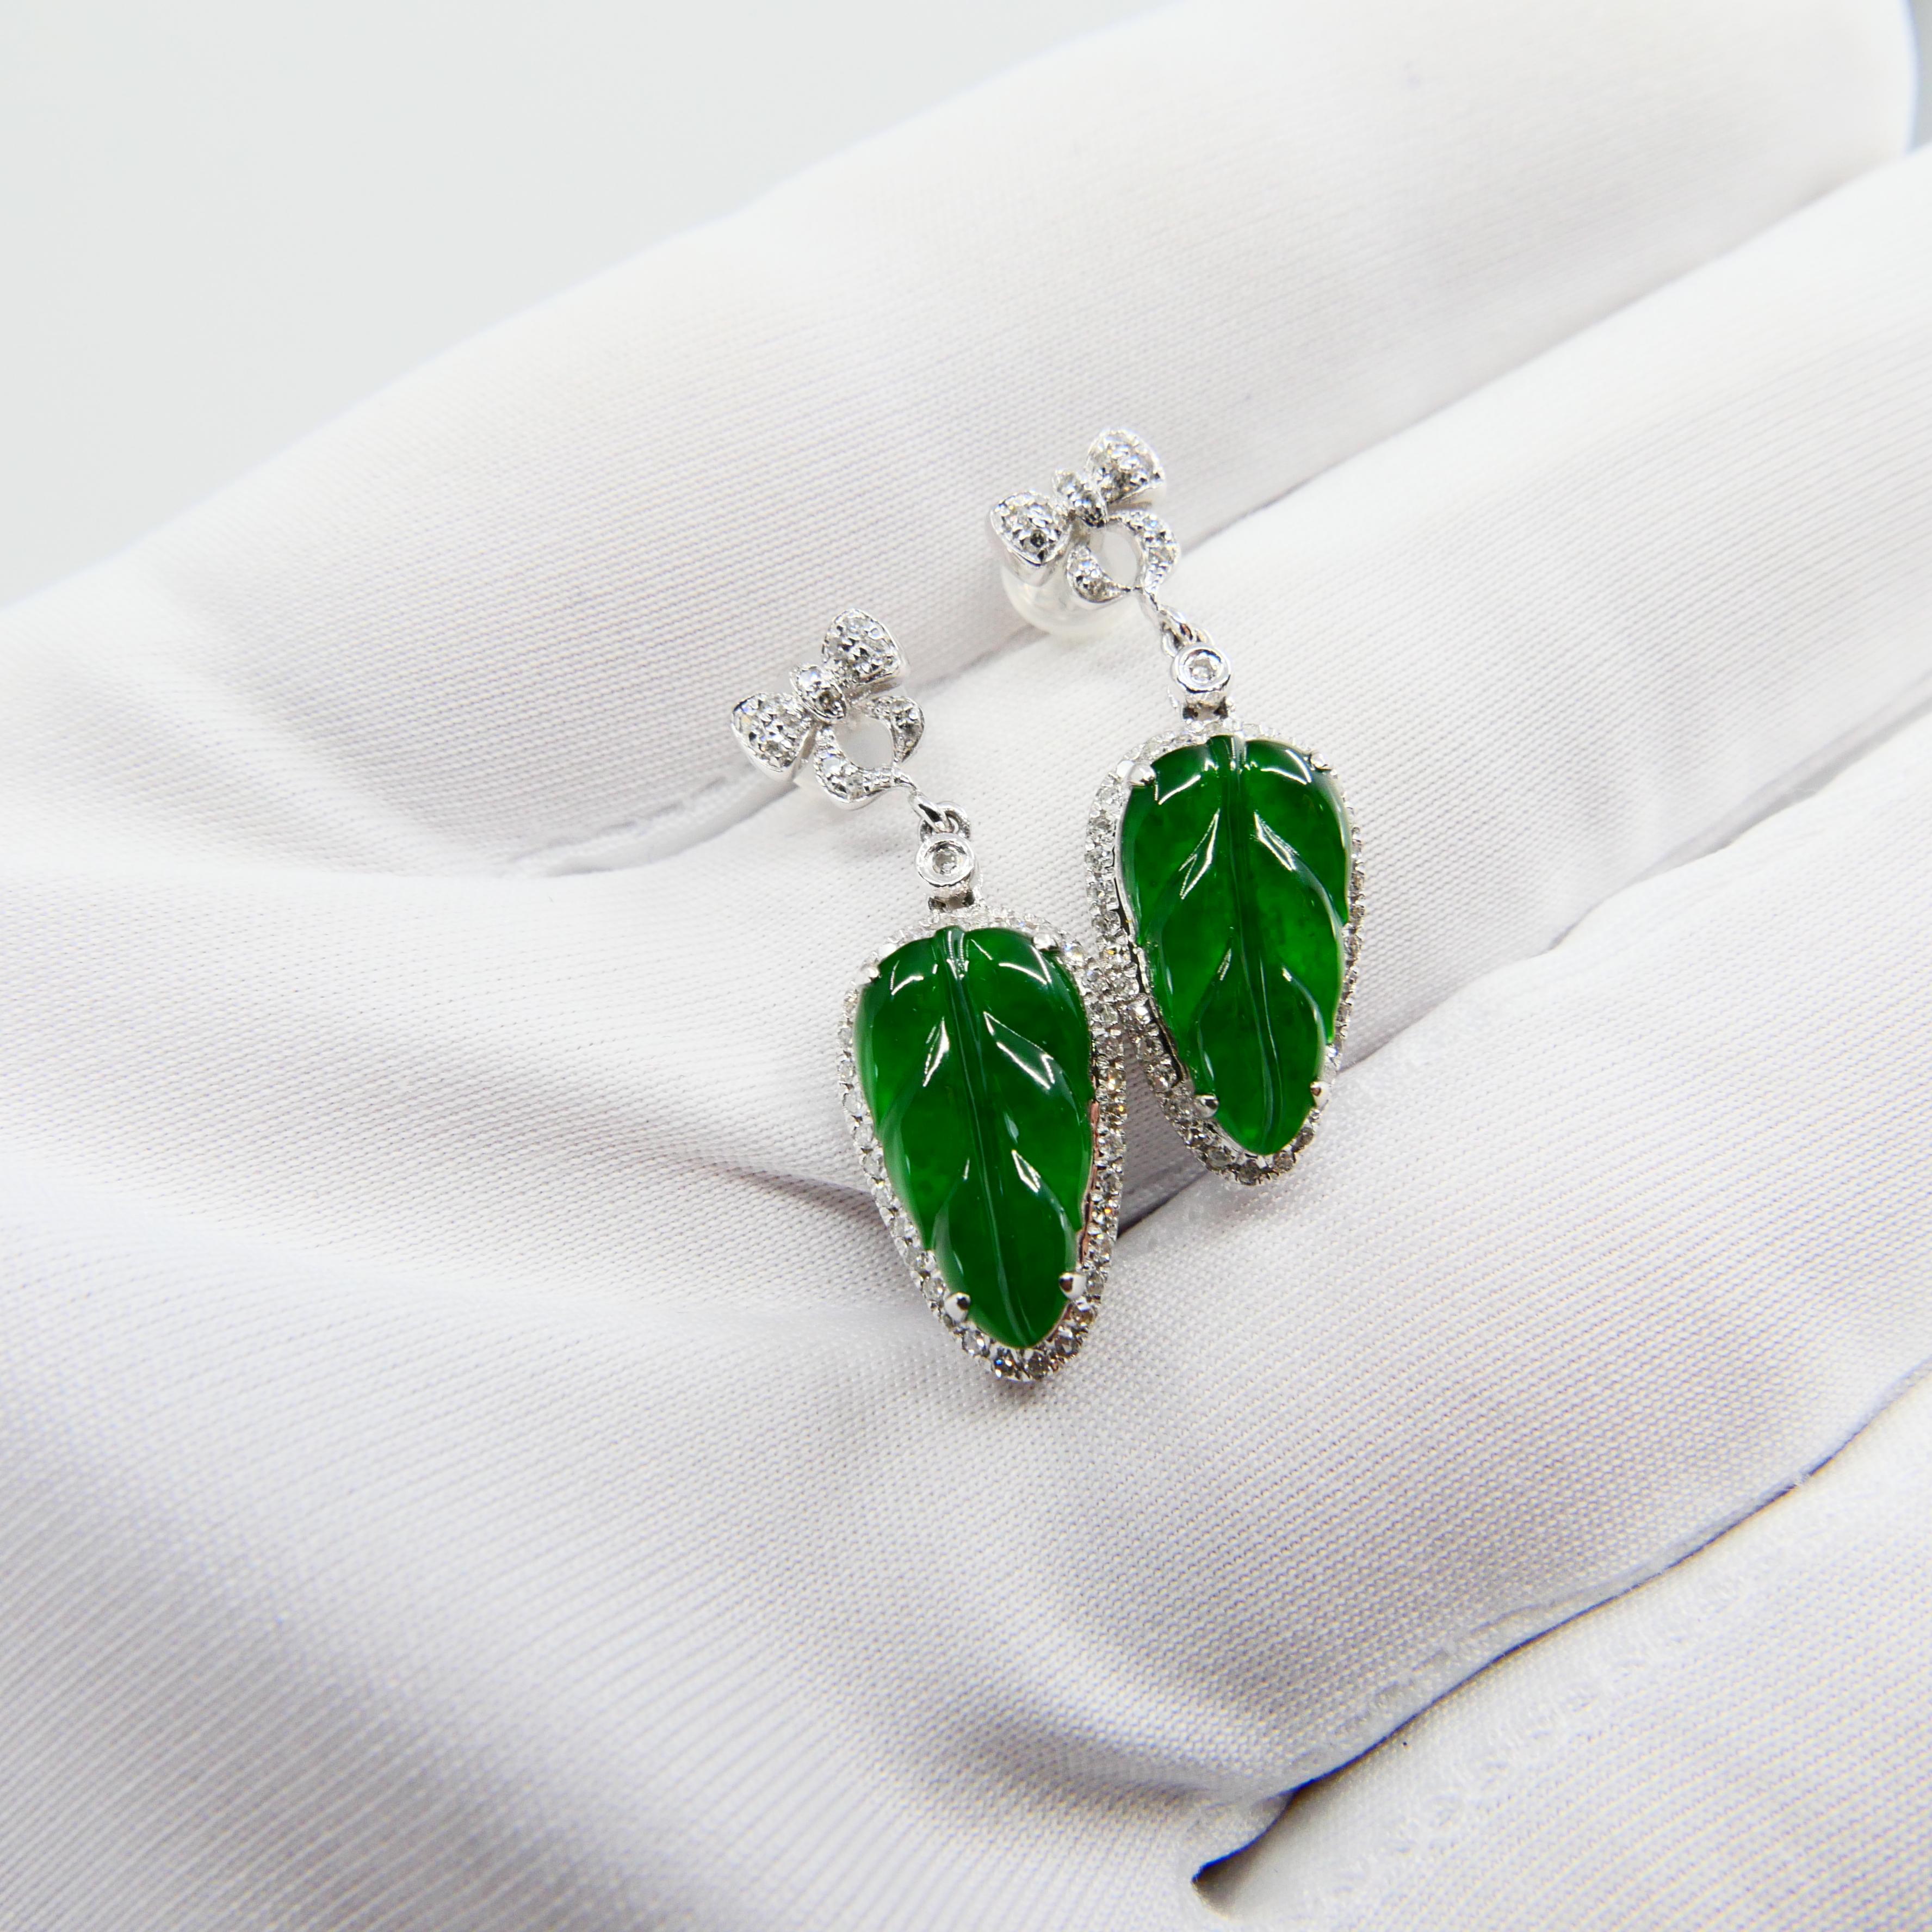 Rough Cut Certified Icy Imperial Green Jade & Diamond Earrings, Collector's Quality For Sale